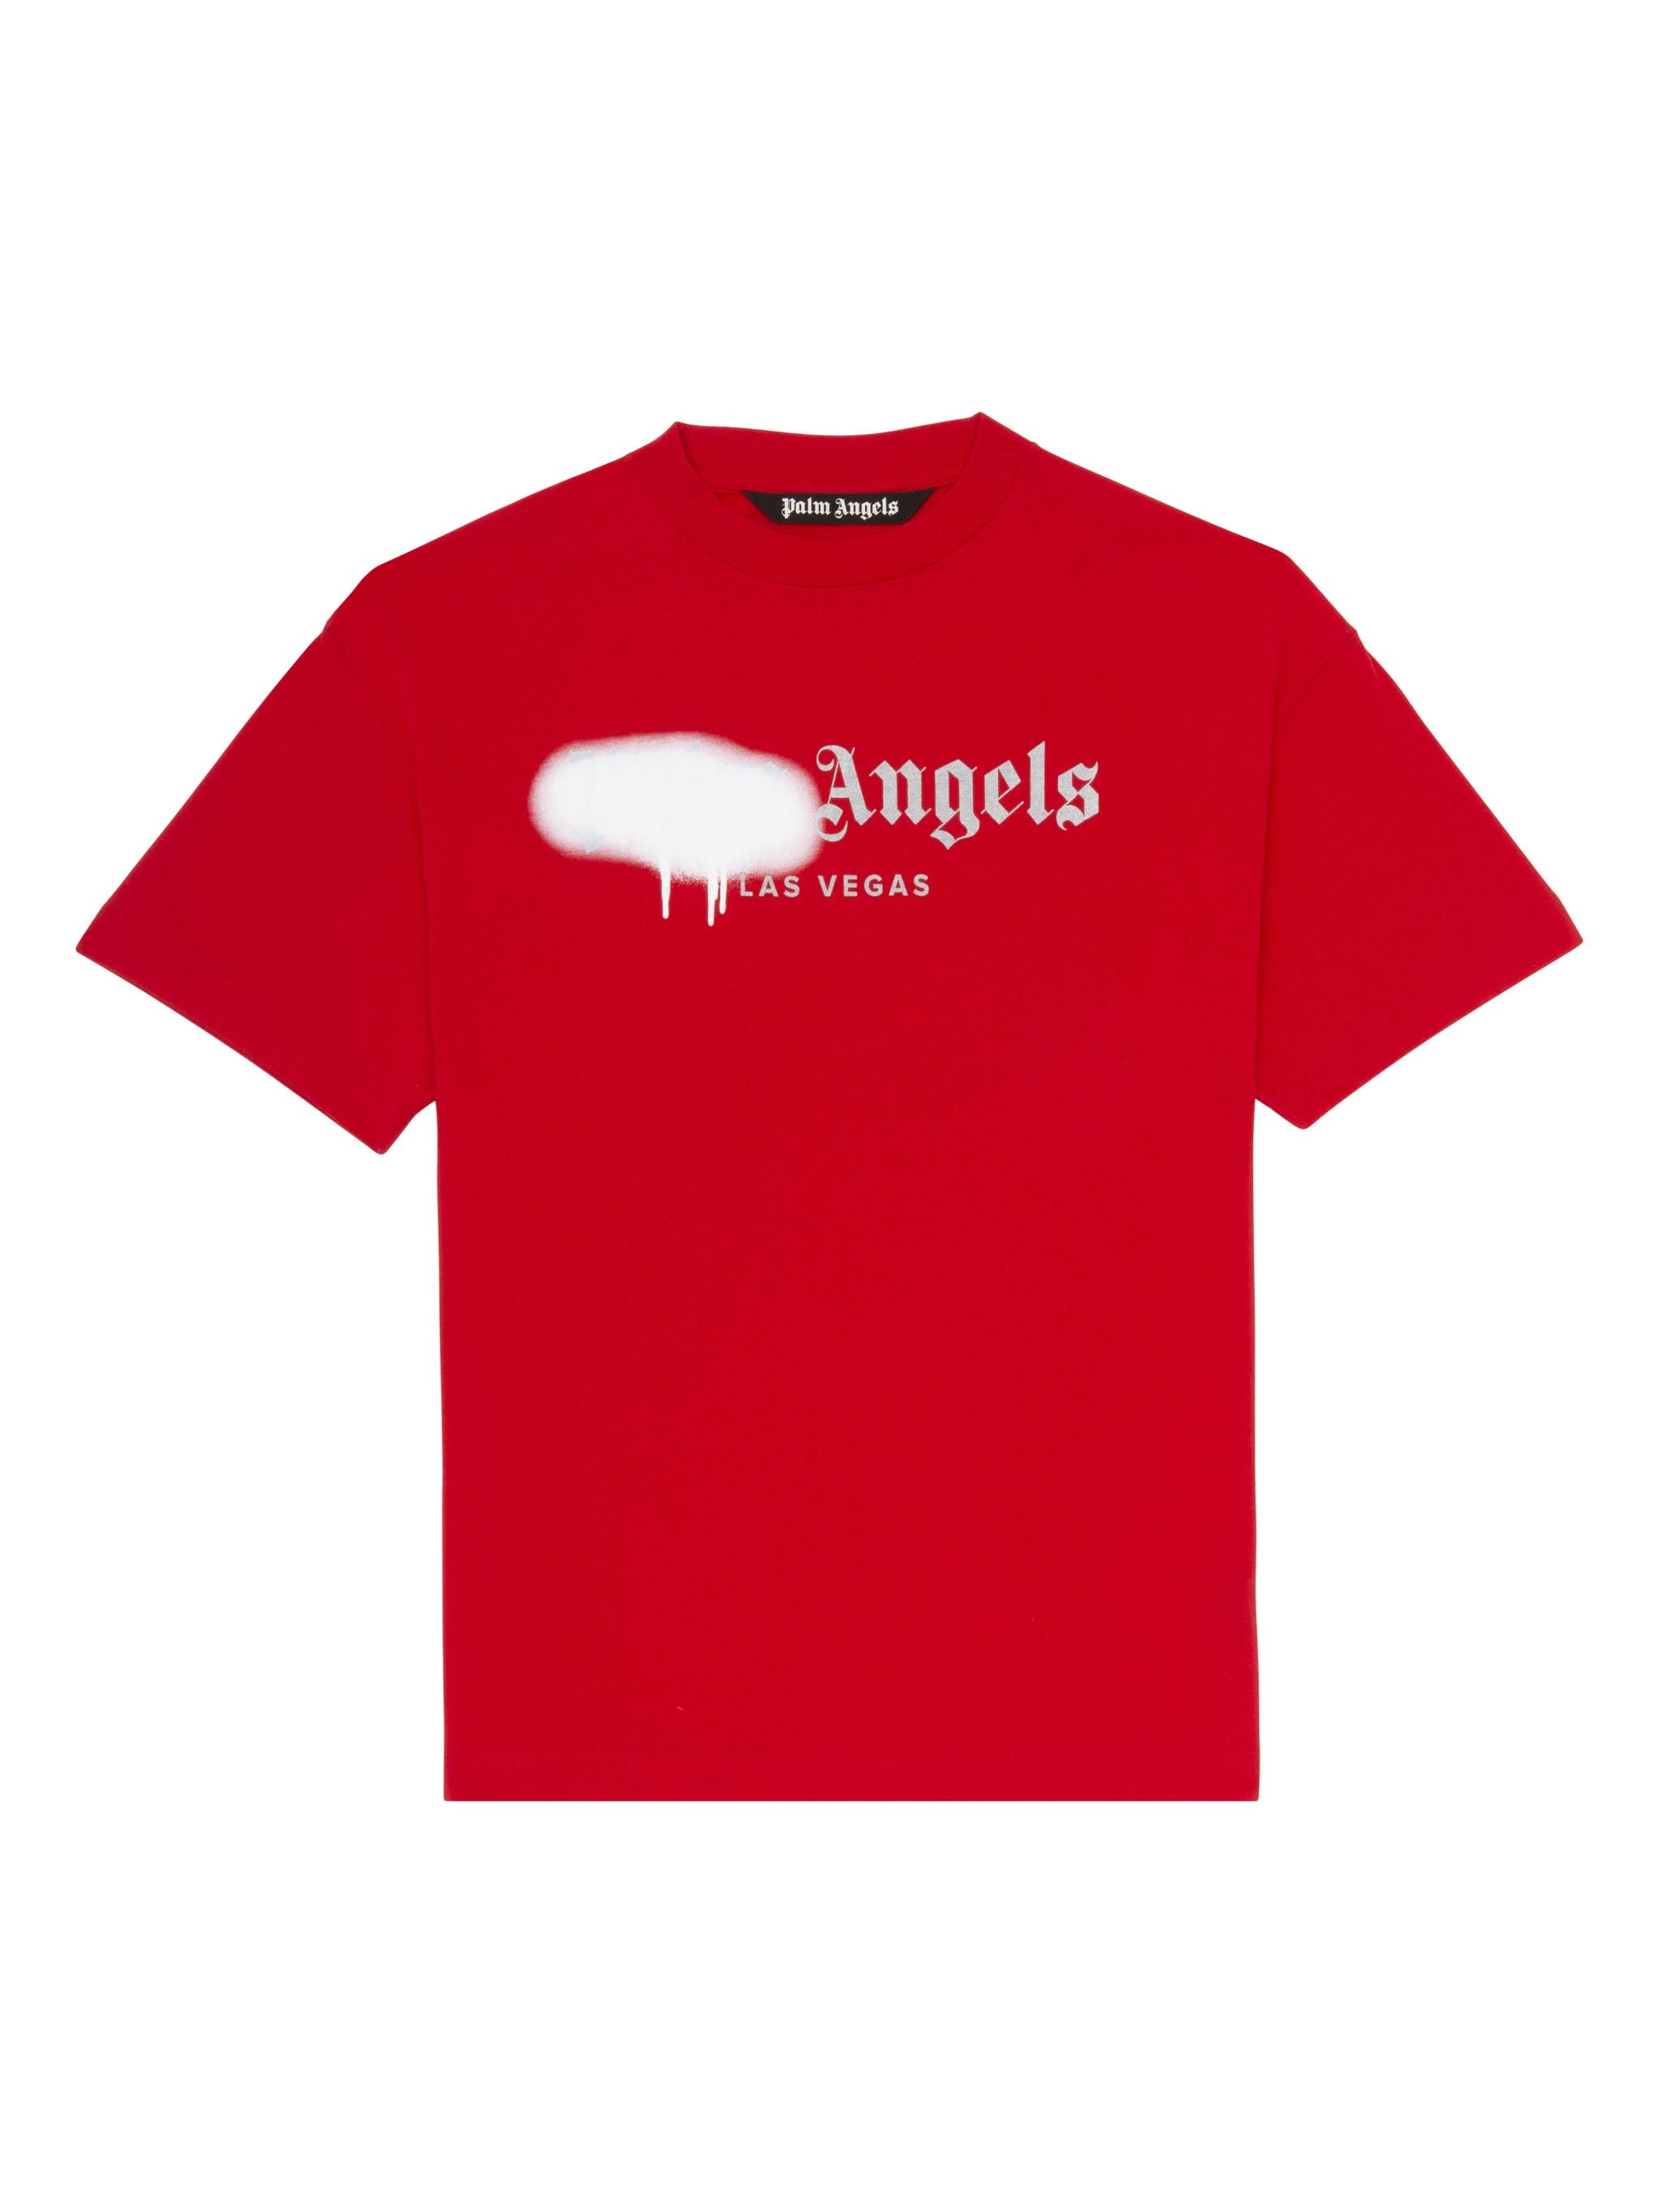 LAS VEGAS S/S SPRAYED T-SHIRT in red - Palm Angels® Official